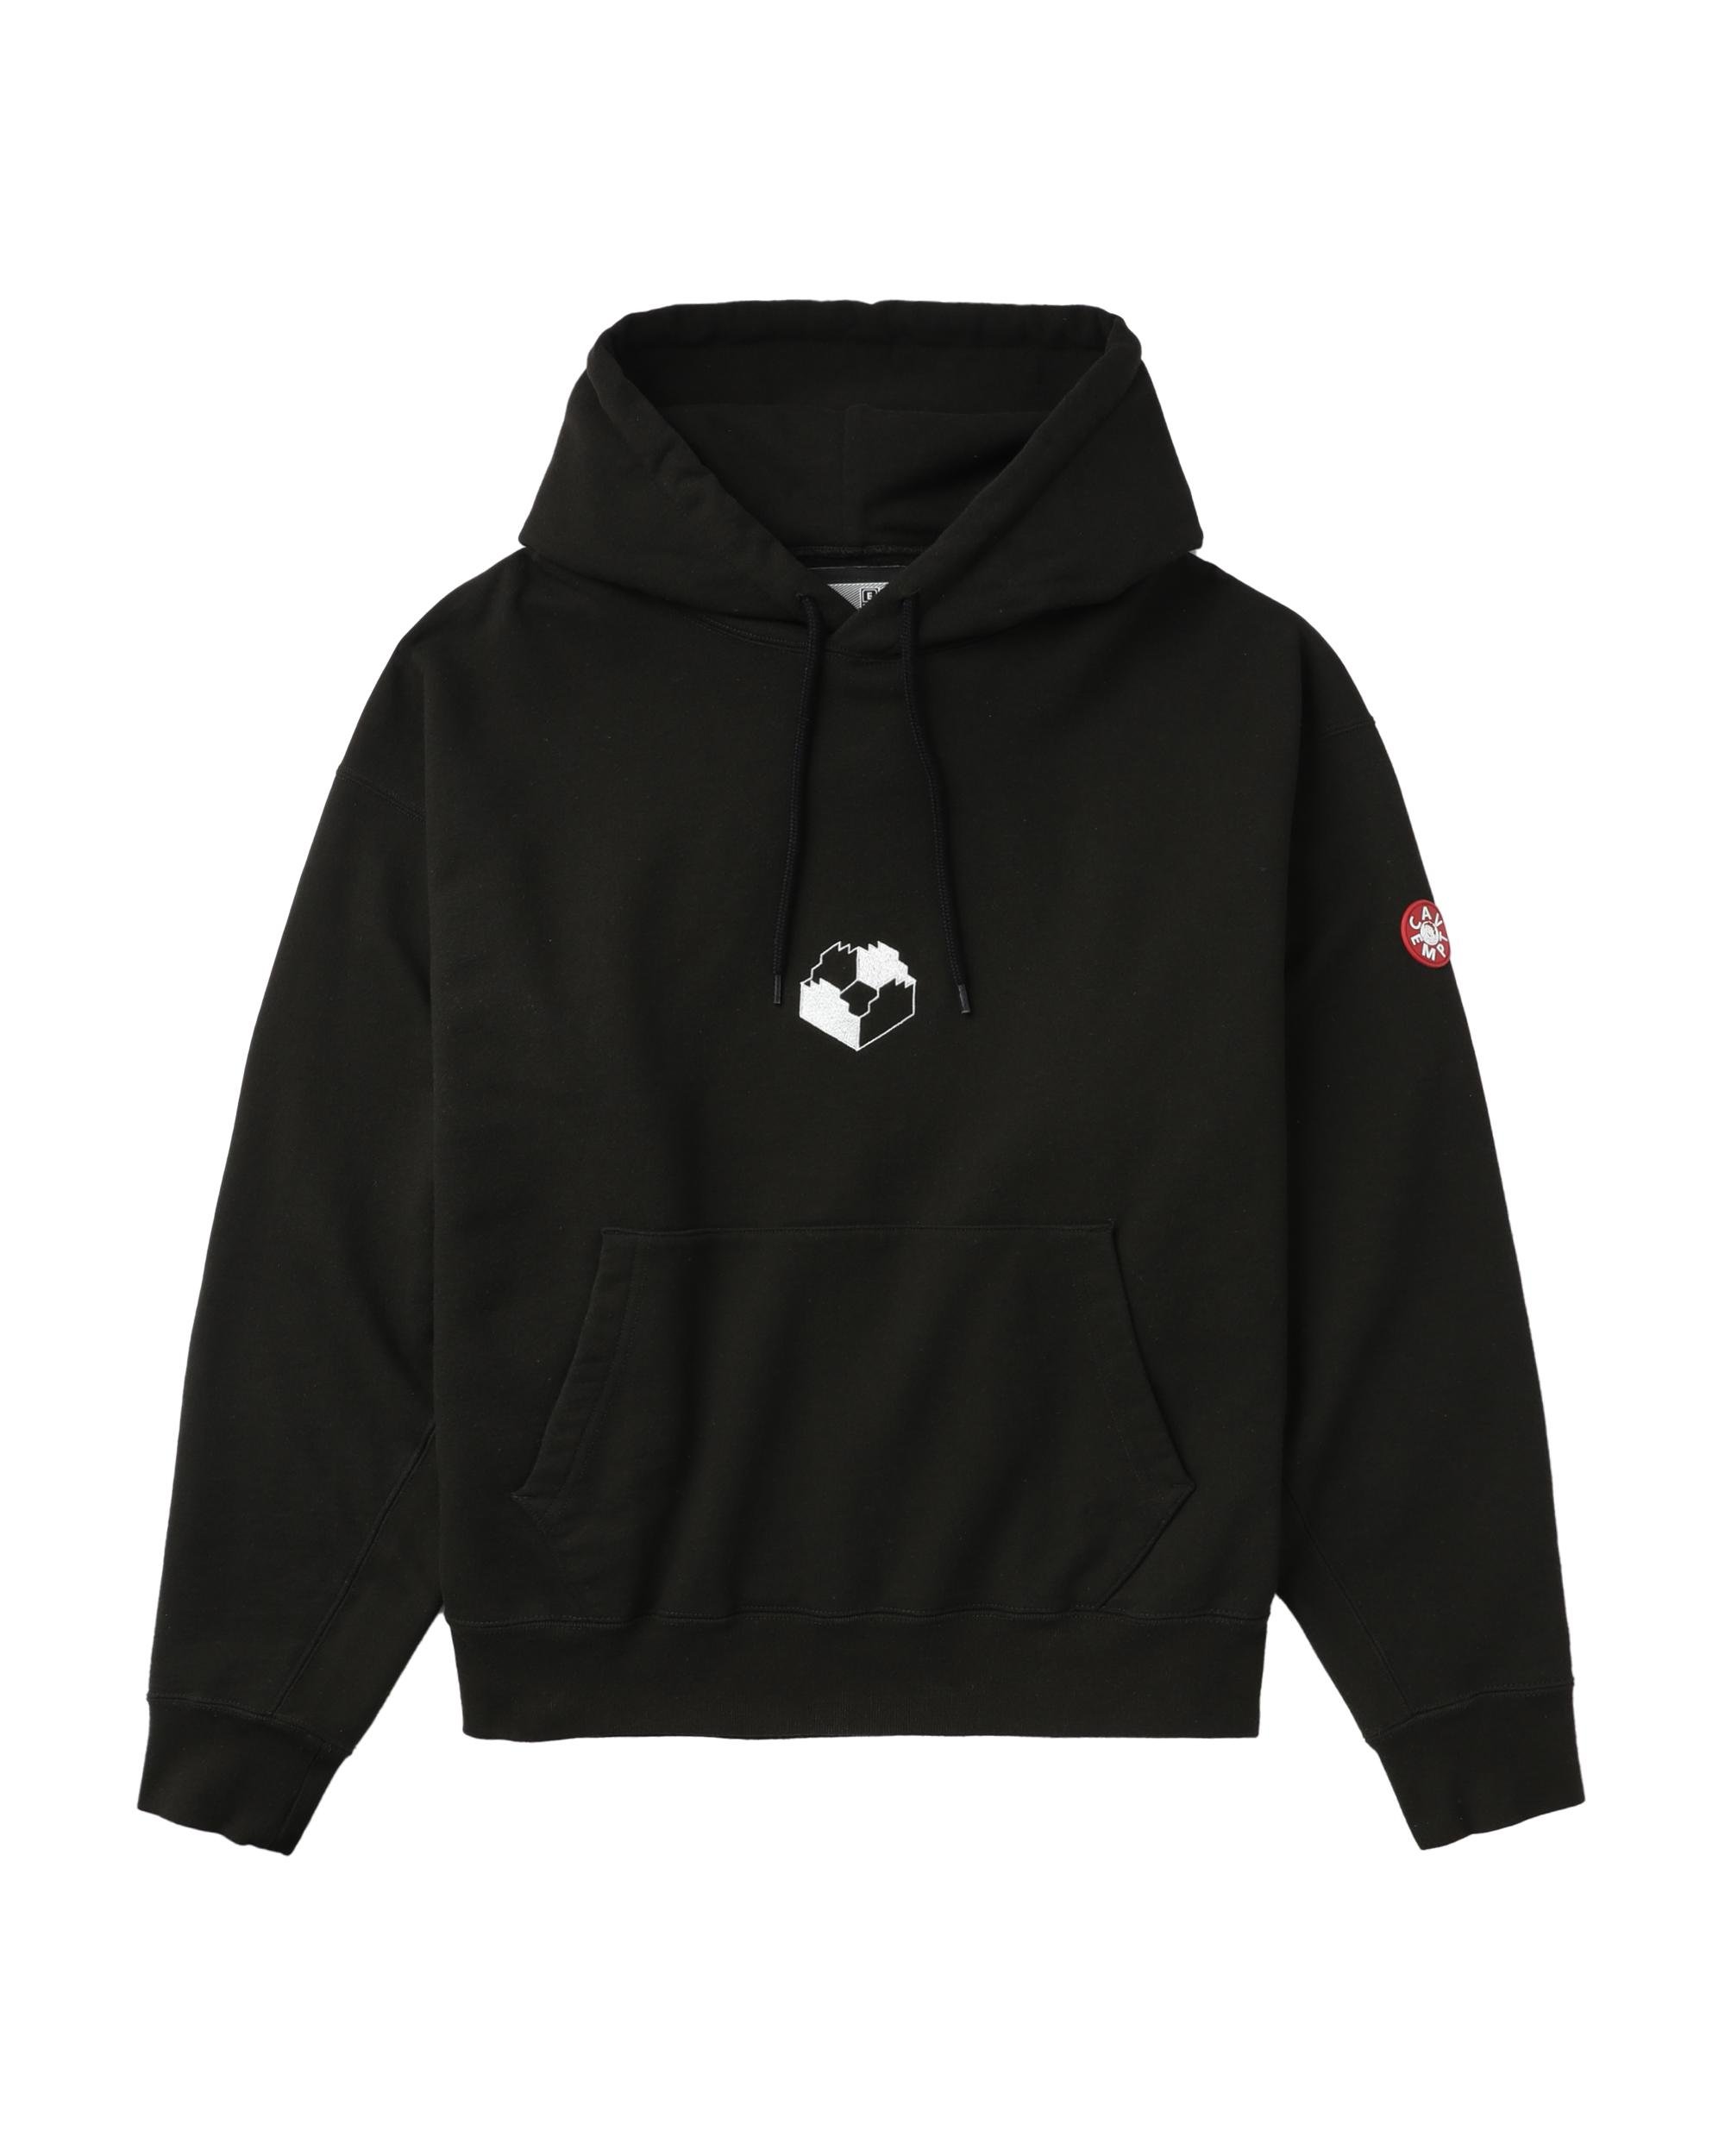 Embroidered hoodie by CAV EMPT